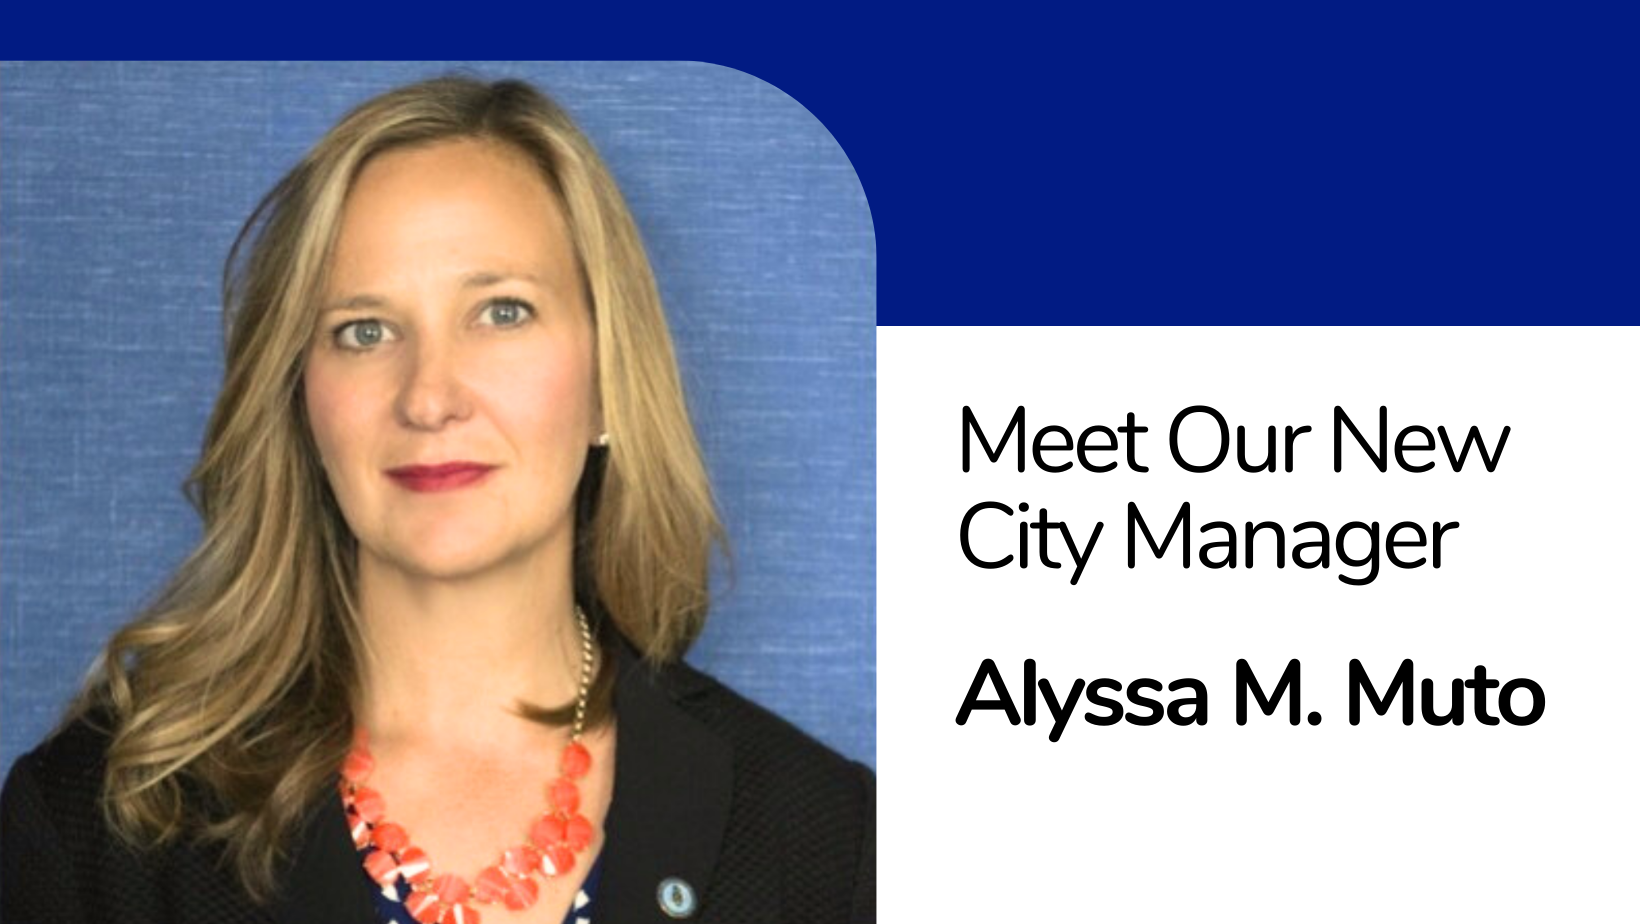 Solana Beach Welcomes Alyssa M. Muto as New City Manager